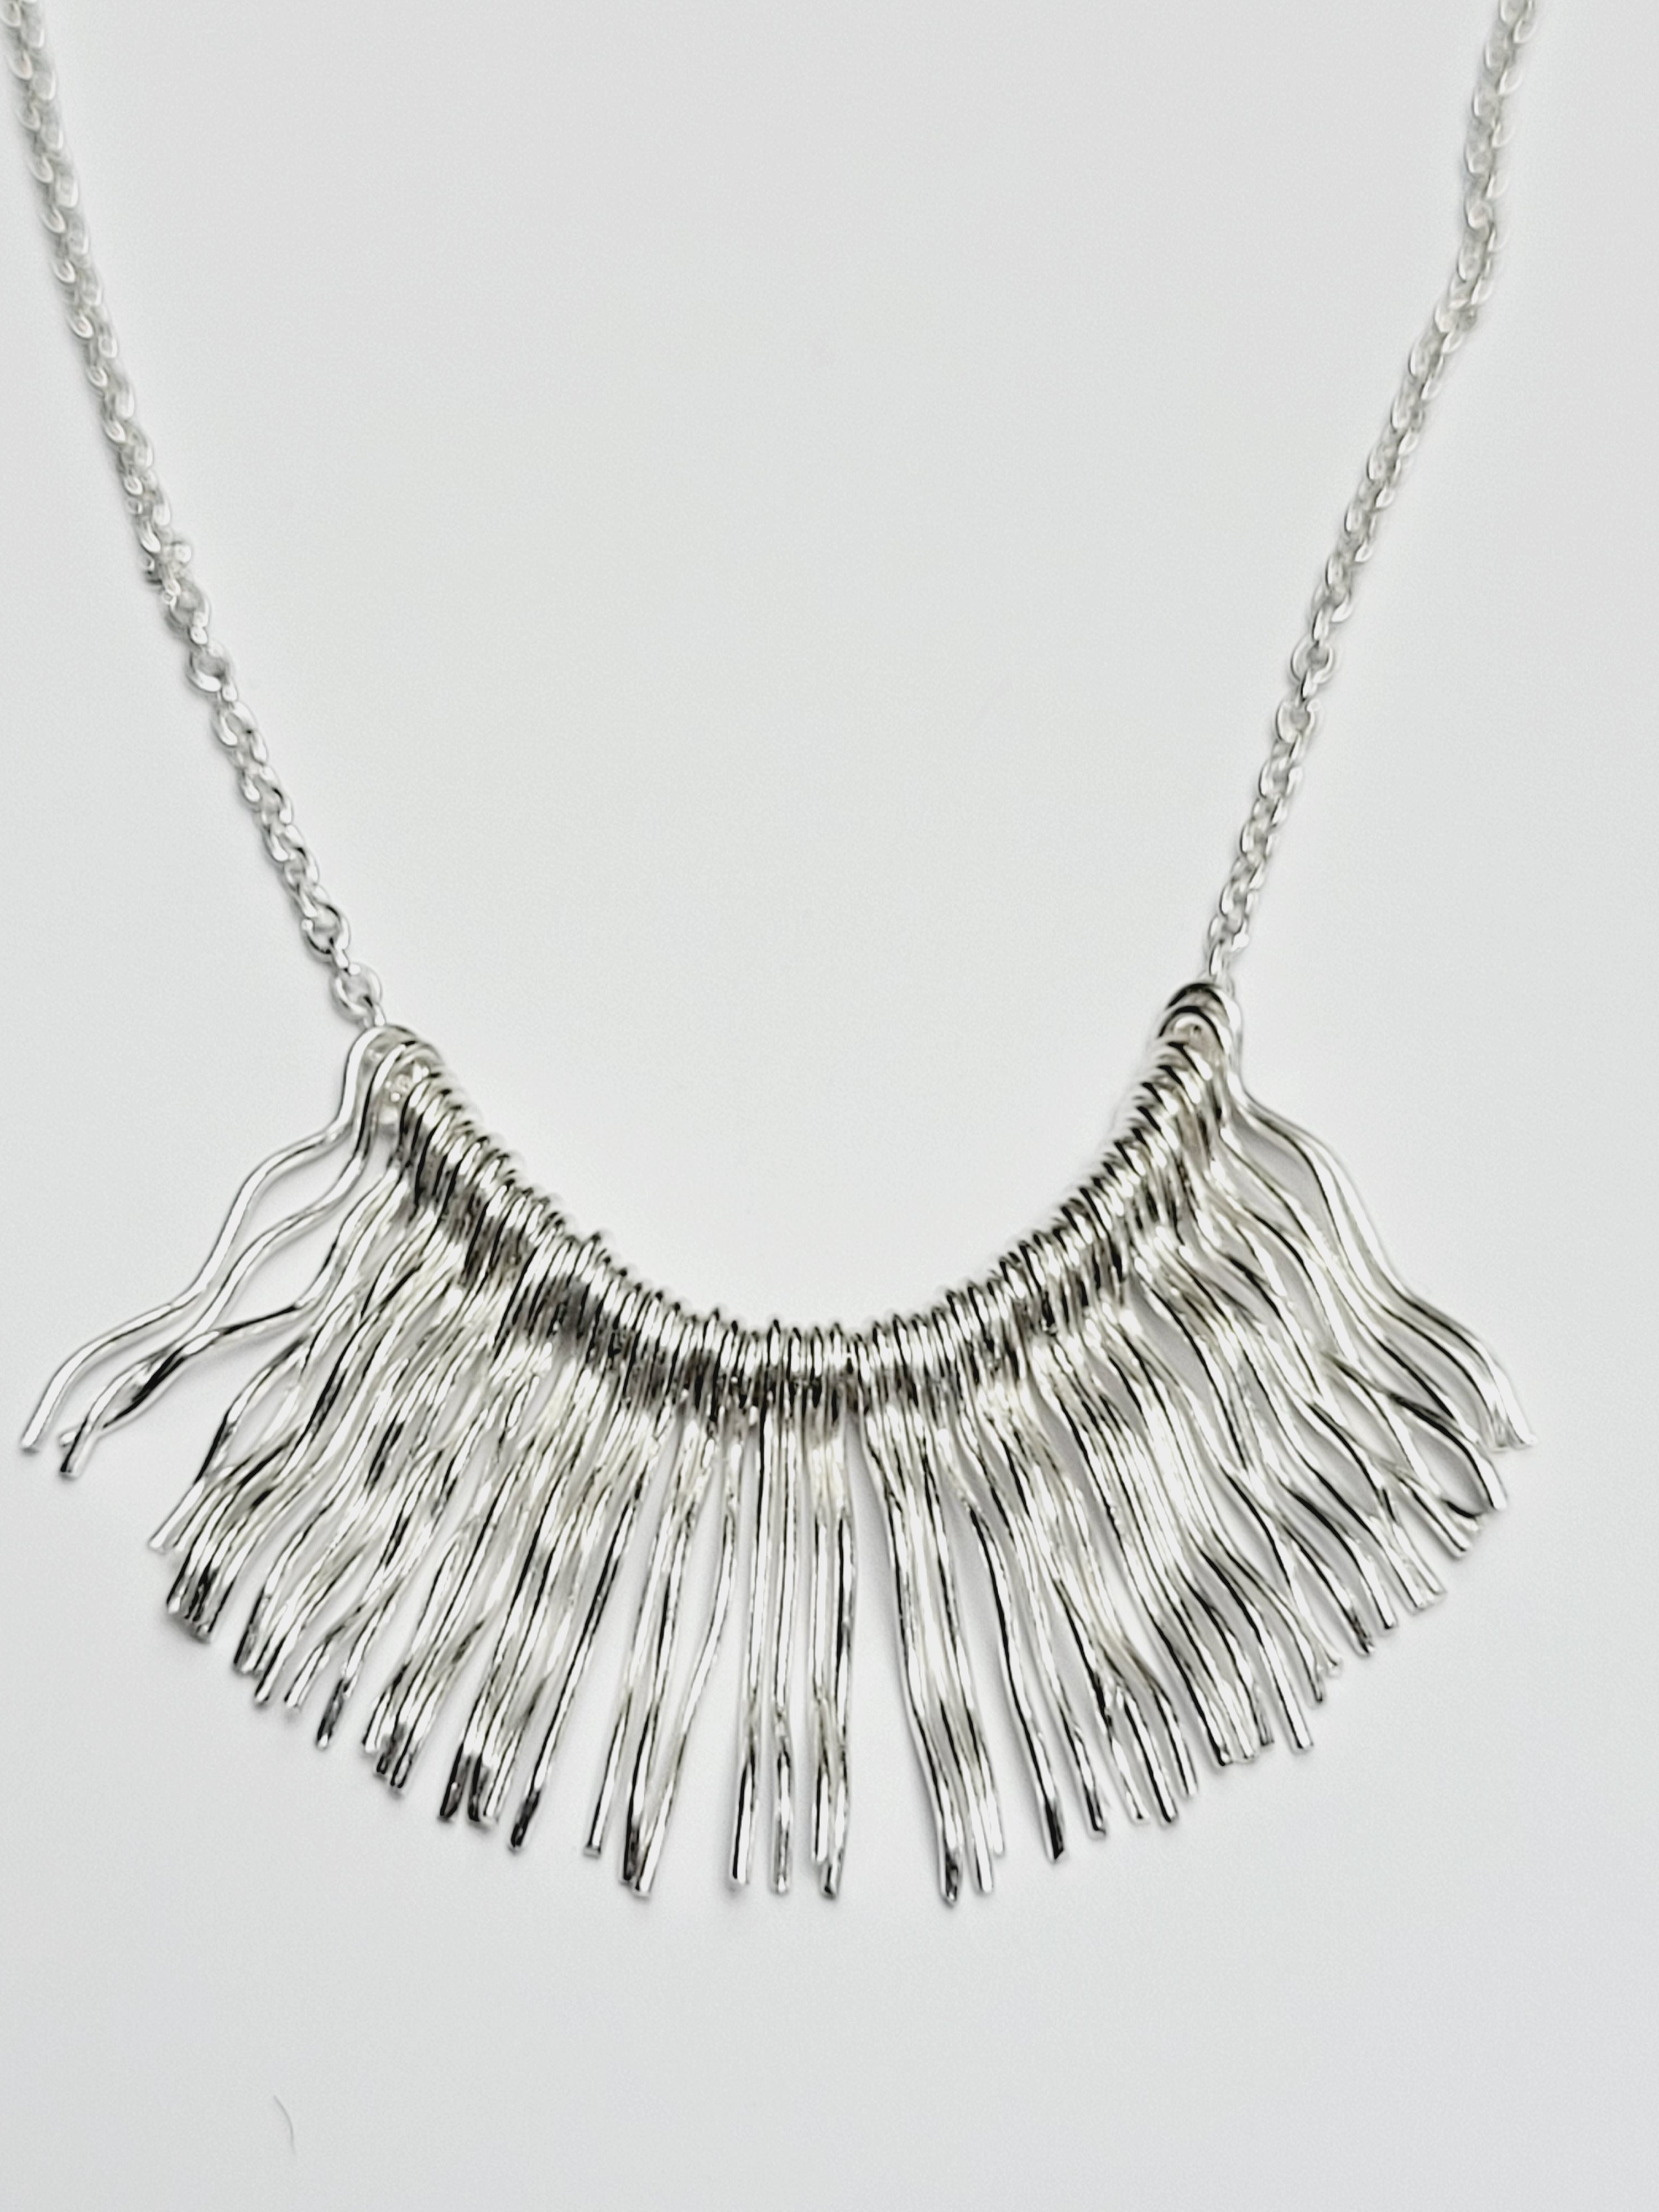 Wiggle Necklace - Sterling Silver